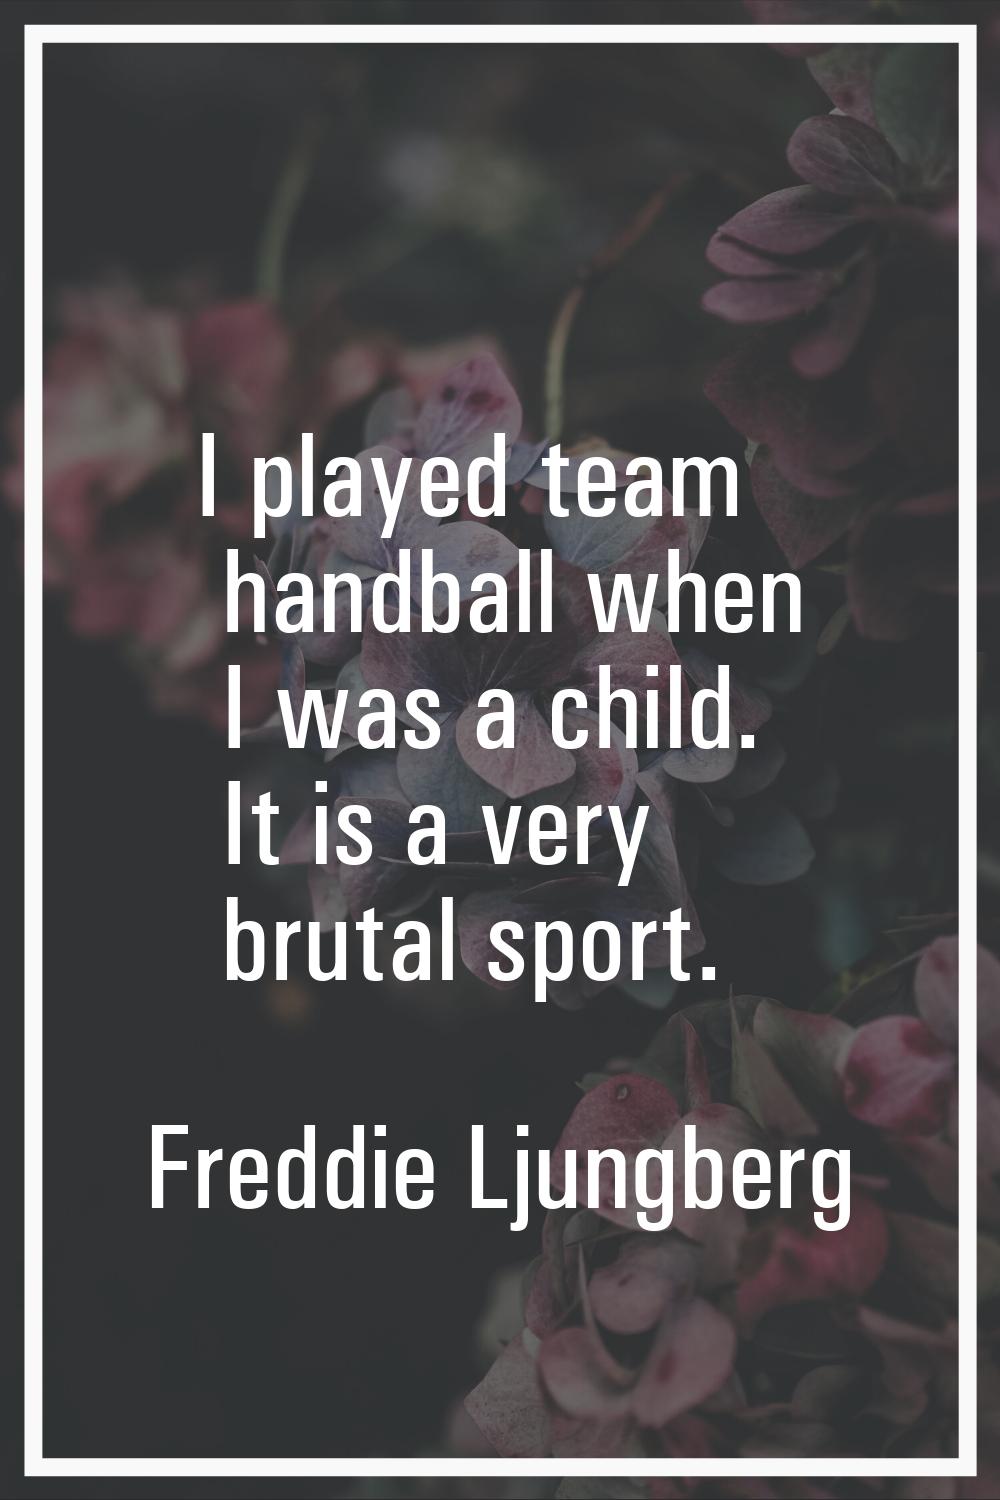 I played team handball when I was a child. It is a very brutal sport.